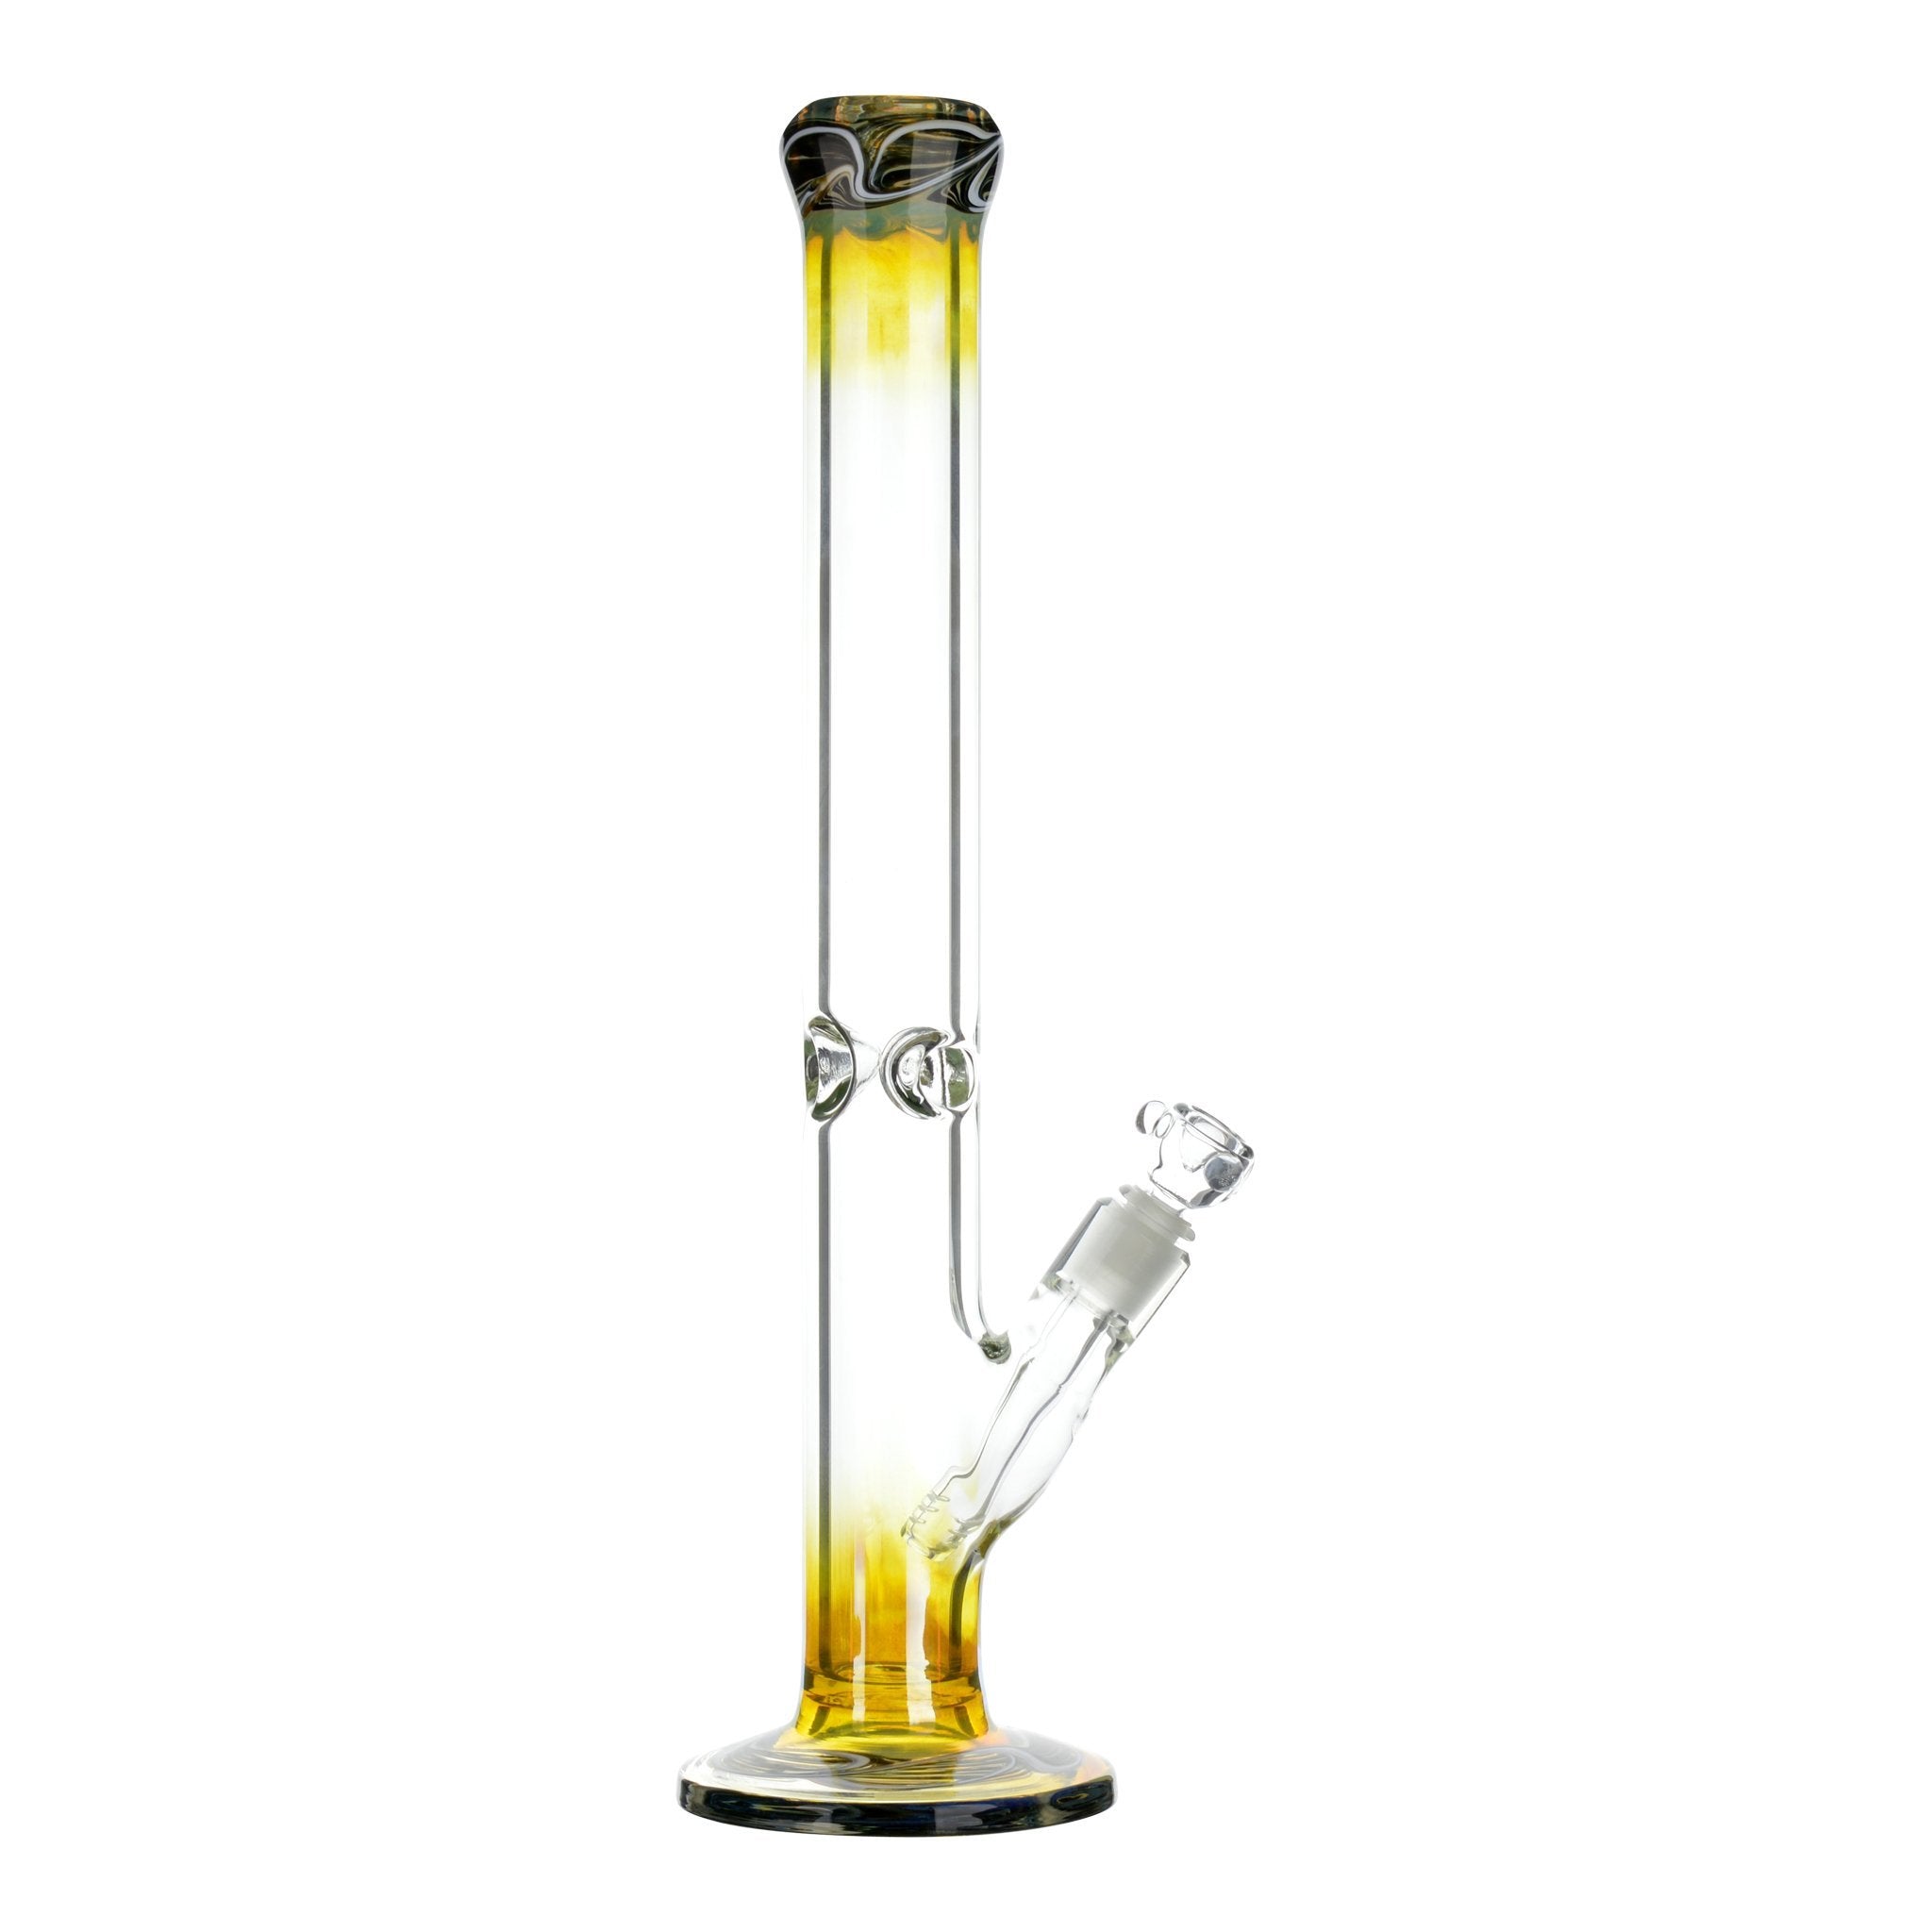 Louie G Vouibong Bong - 8.5in - Everything 420